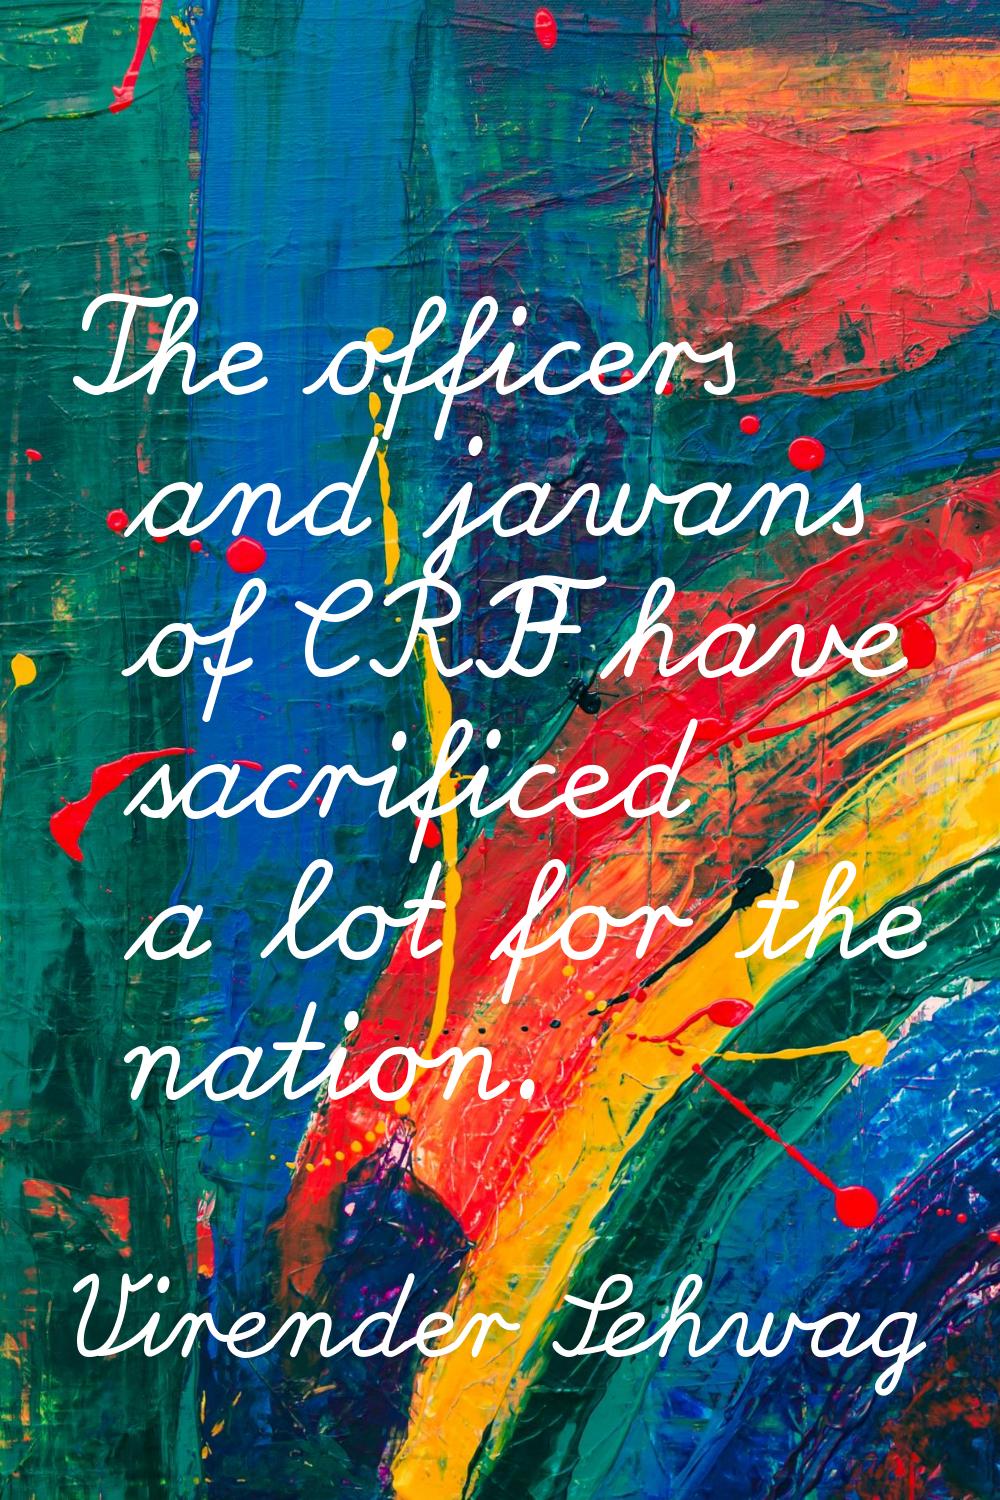 The officers and jawans of CRPF have sacrificed a lot for the nation.